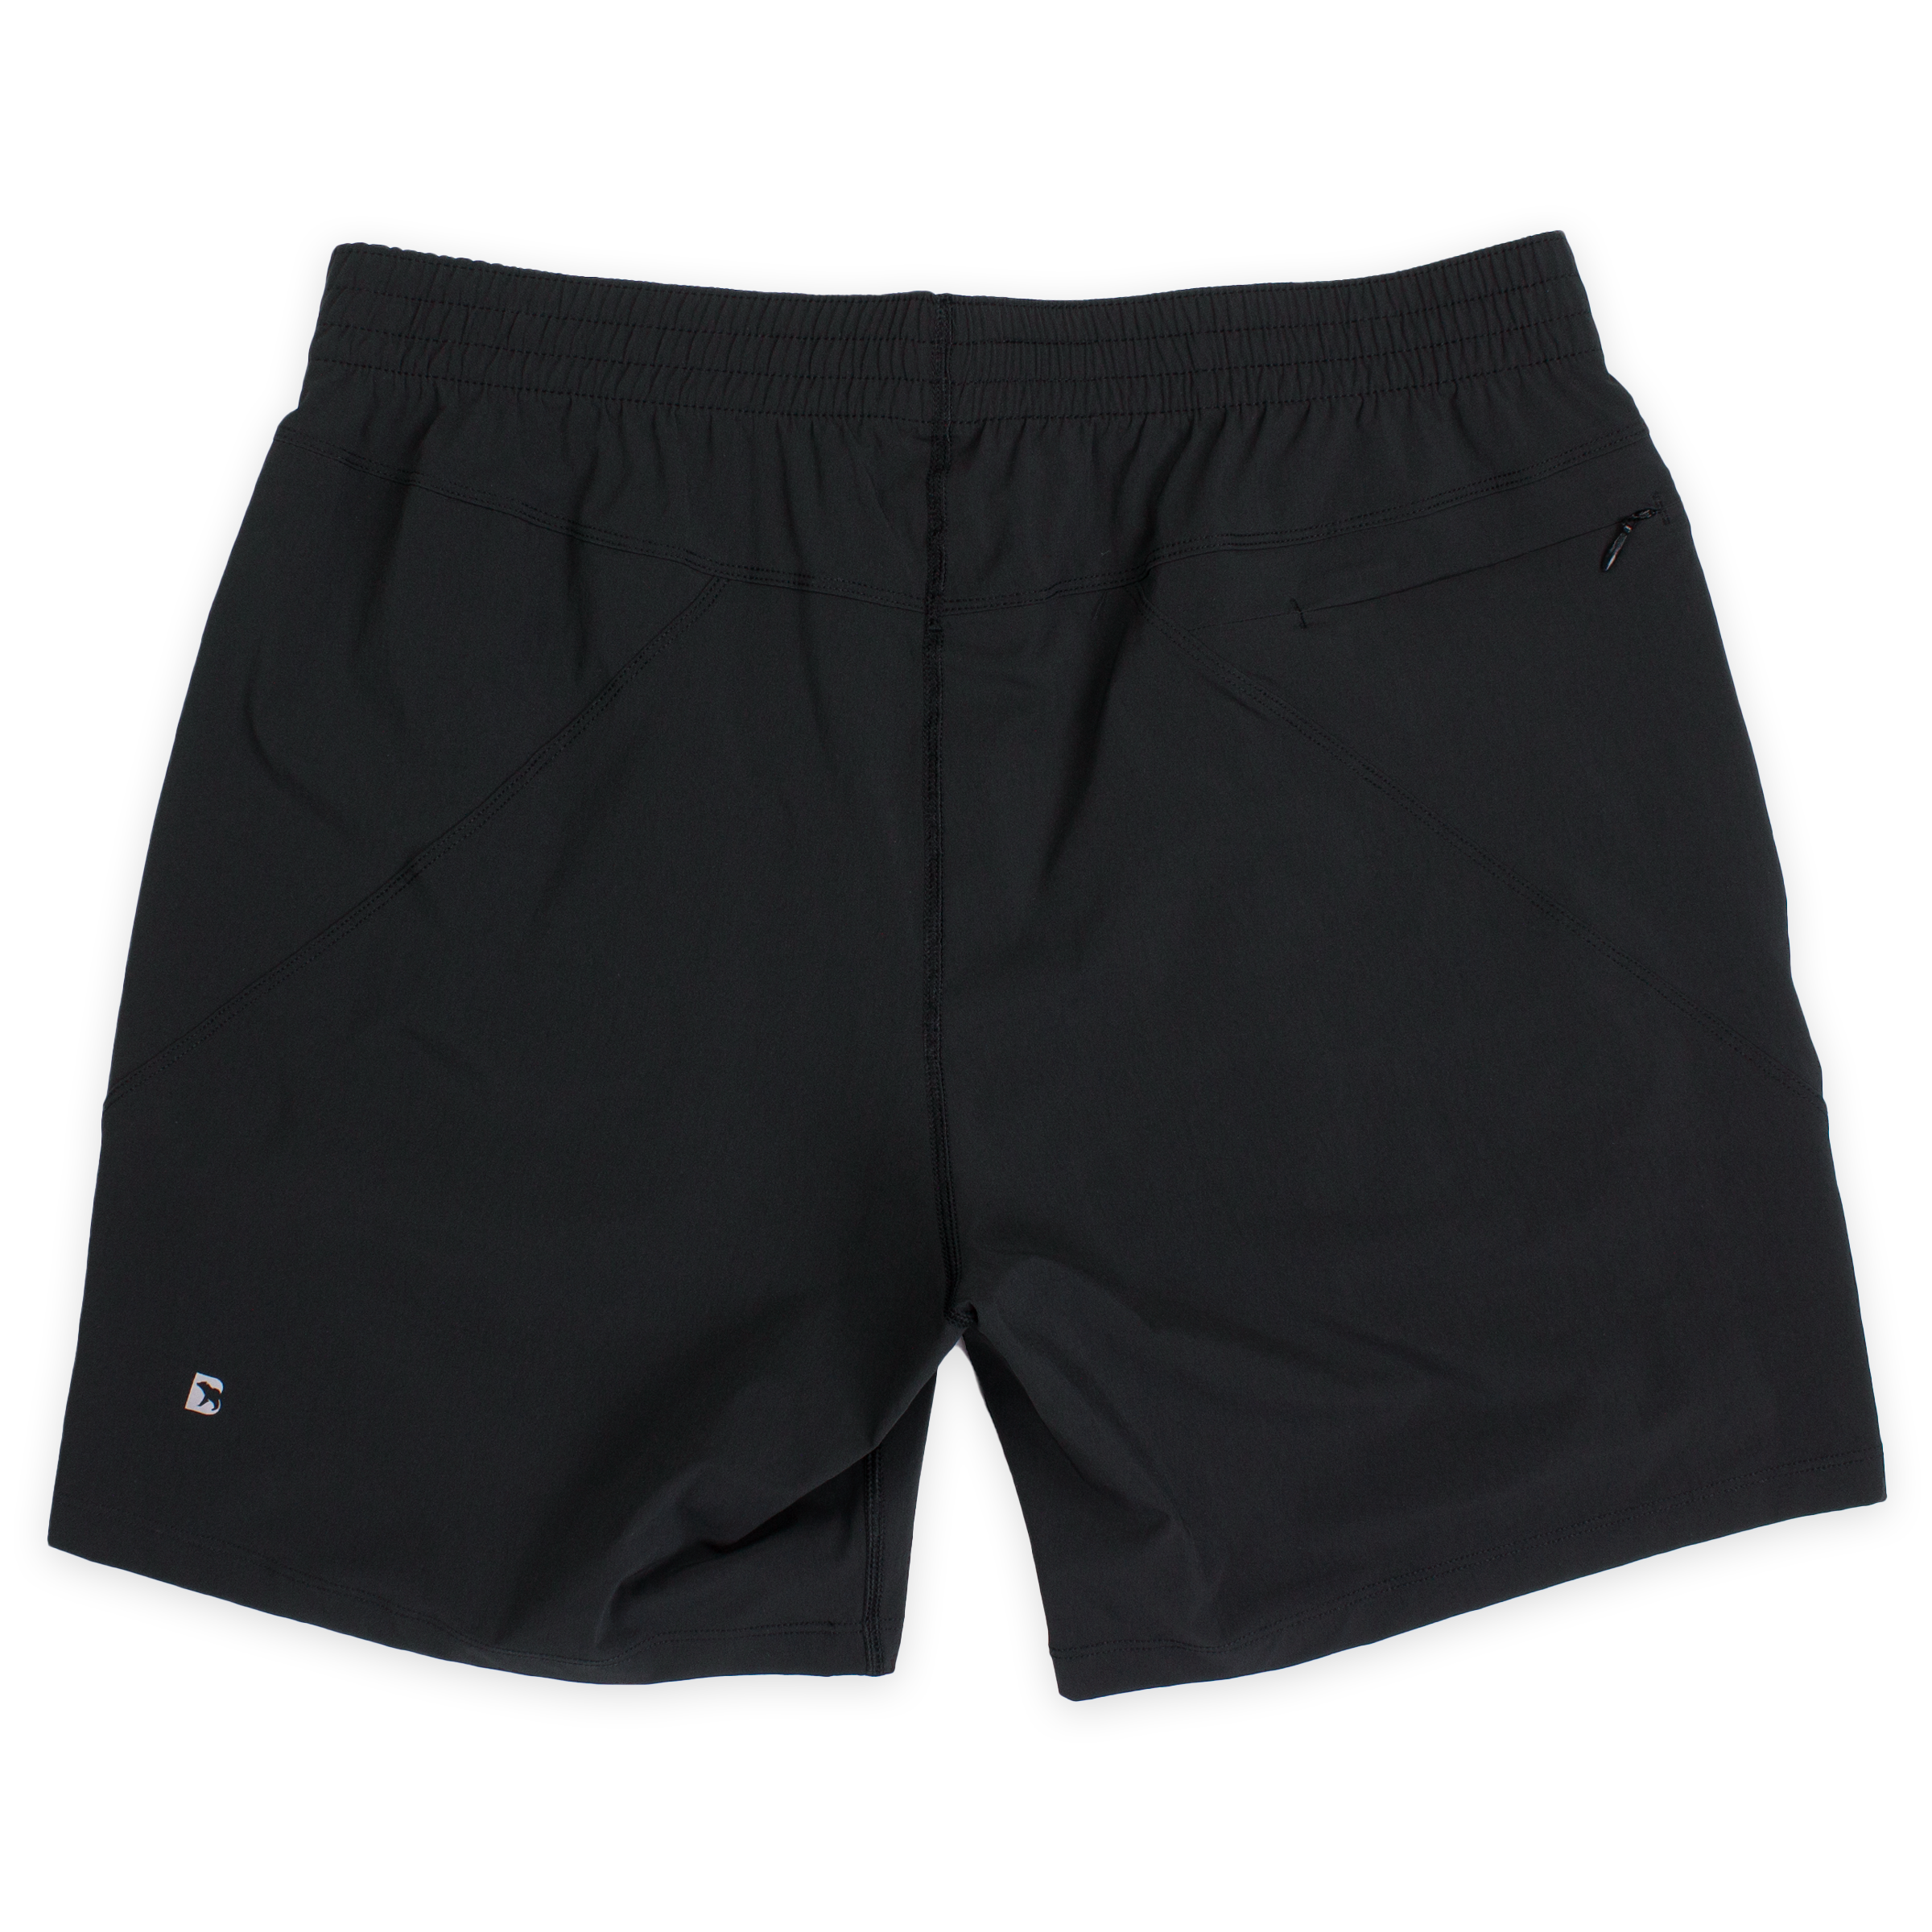 Atlas Short 7" Black Back with elastic waistband, back right zippered pocket, and small reflective logo of Bear drawn inside the letter B in bottom left corner